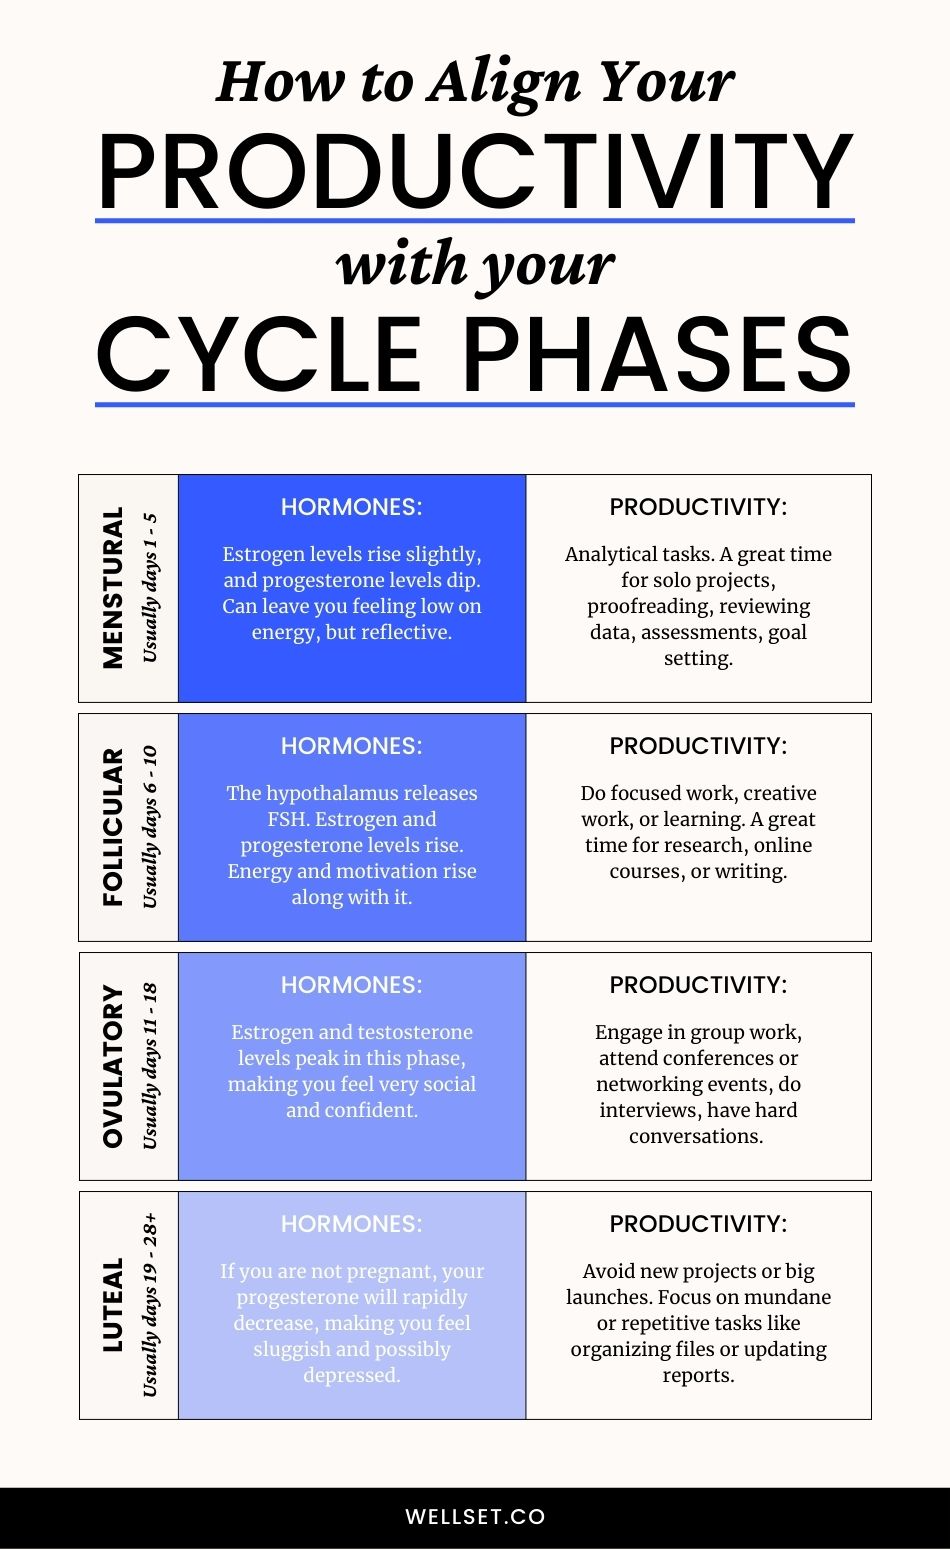 Productivity Tips for Each Phase of Your Menstrual Cycle